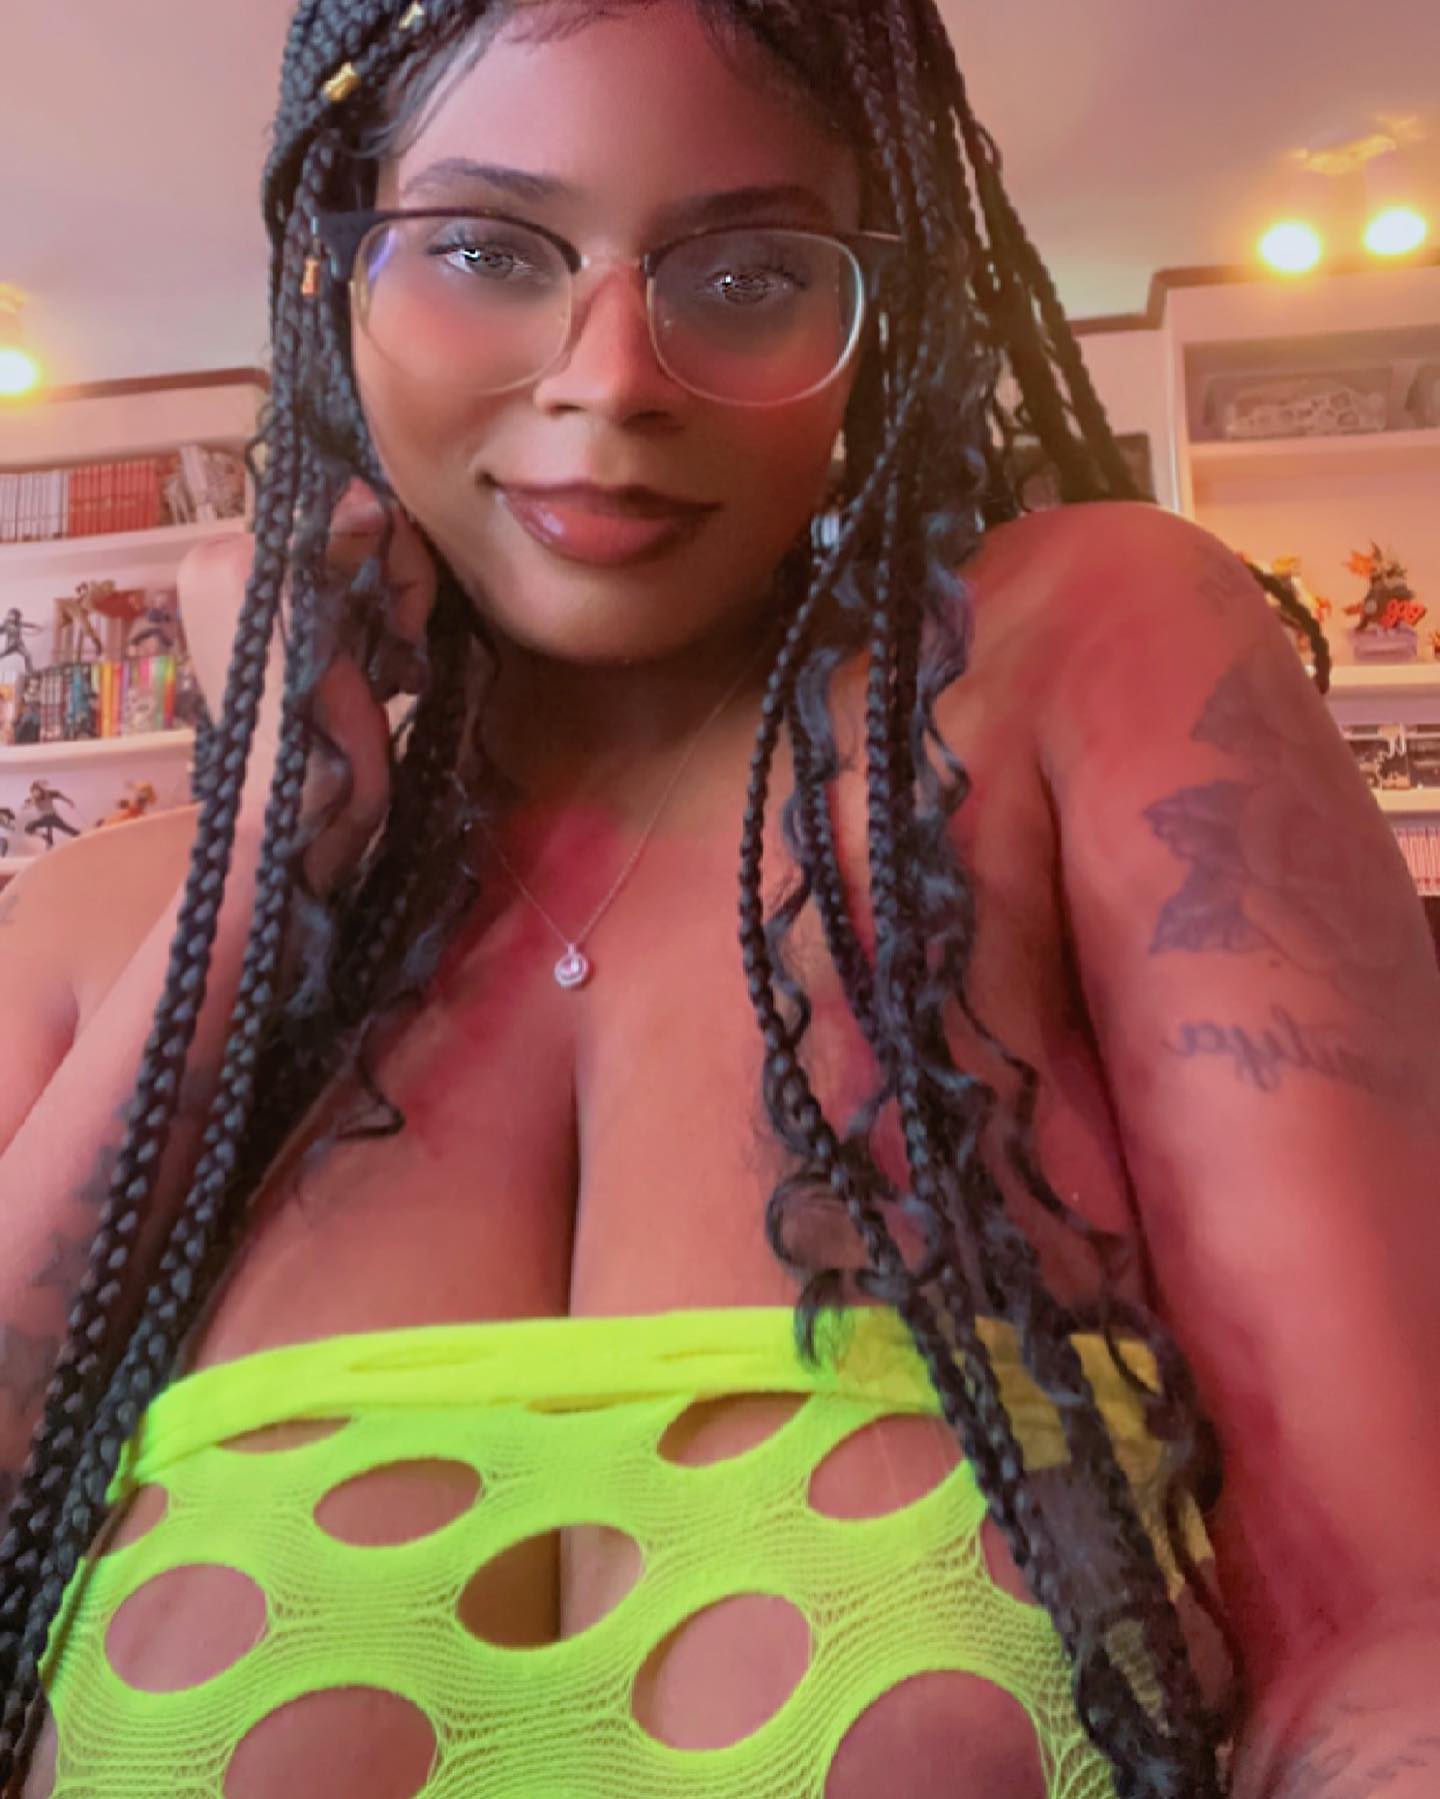 Some out of #cosplay pictures for ya. ♥️ 

Is this dress neon lime green or neon yellow? 👀

I felt real cute 🥰

- 💛💚💛💚💛💚💛💚💛💚💛💚💛💚💛💚💛💚💛💚💛💚💛

-New pics & videos up on both 🌶️ sites!! Check my 🔗 for the free 🌶️ content & sub 🌶️ content!! 

#love #model #hot #beautiful #fashion #beauty #girl #like #cute #photography #lingerie #fitness #girls #style #photooftheday #art  #pretty #sensual #body #makeup #beauty #photography #beautiful #style  #skincare #makeuplover #art #makeupaddict #selfie #hair #makeuplooks #photo